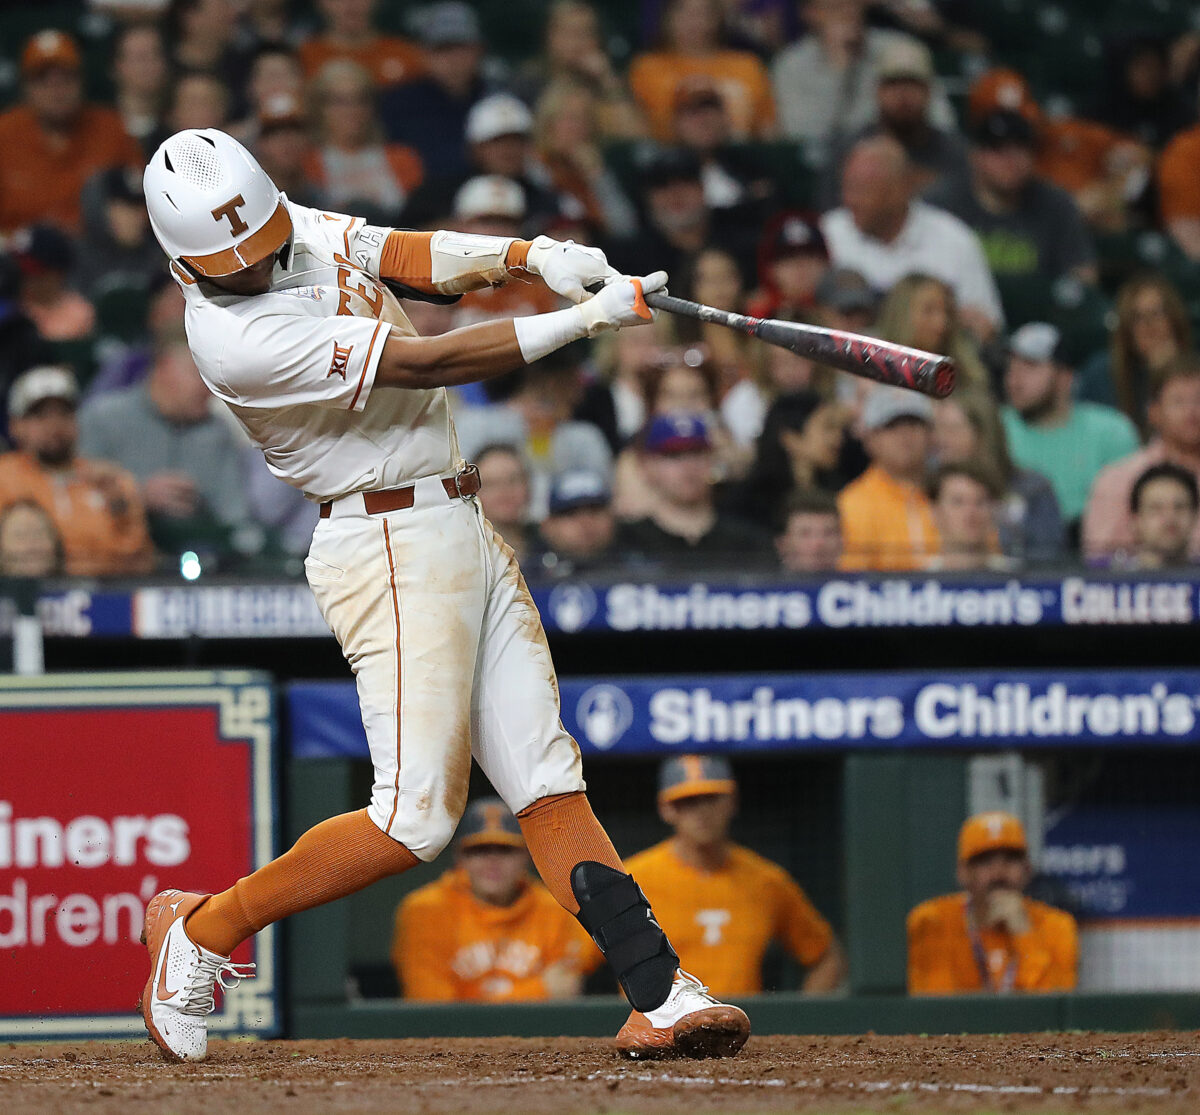 No. 1 Texas takes down No. 17 Tennessee 7-2, improving to 10-0